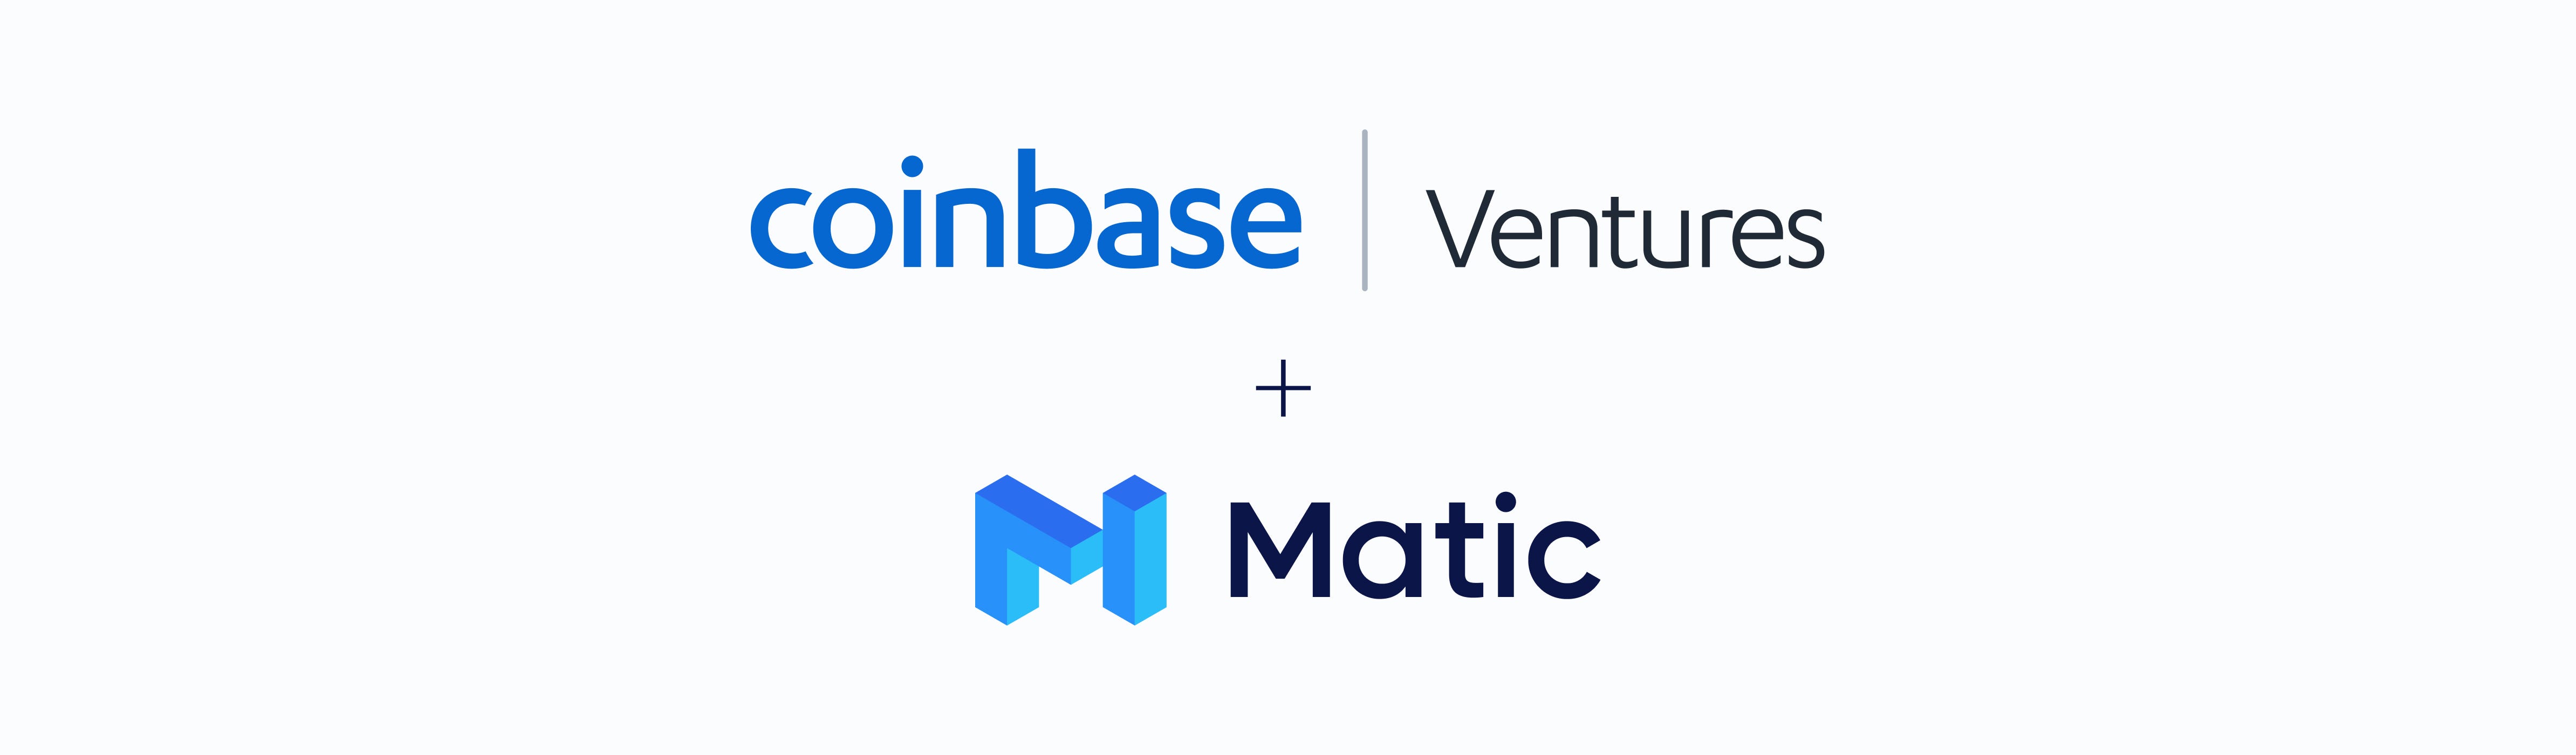 Announcing our funding round. Coinbase Ventures is backing ...